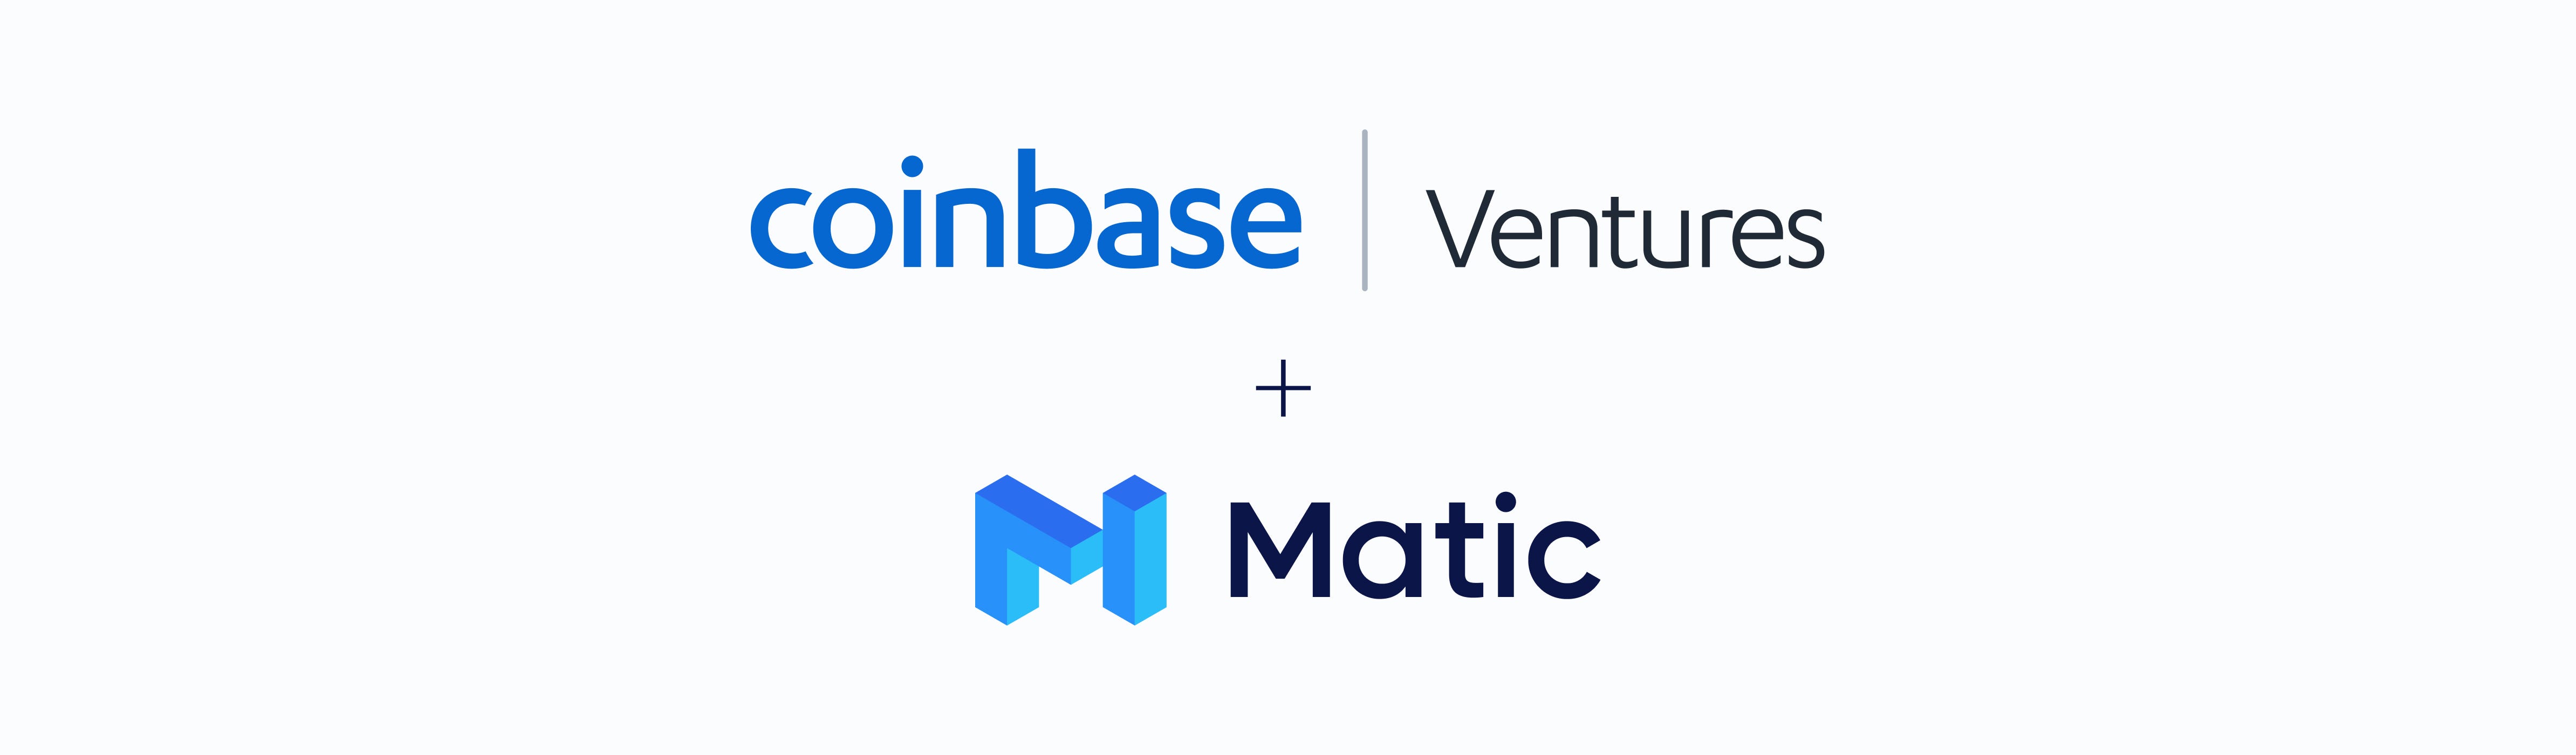 Announcing our funding round. Coinbase Ventures is backing ...